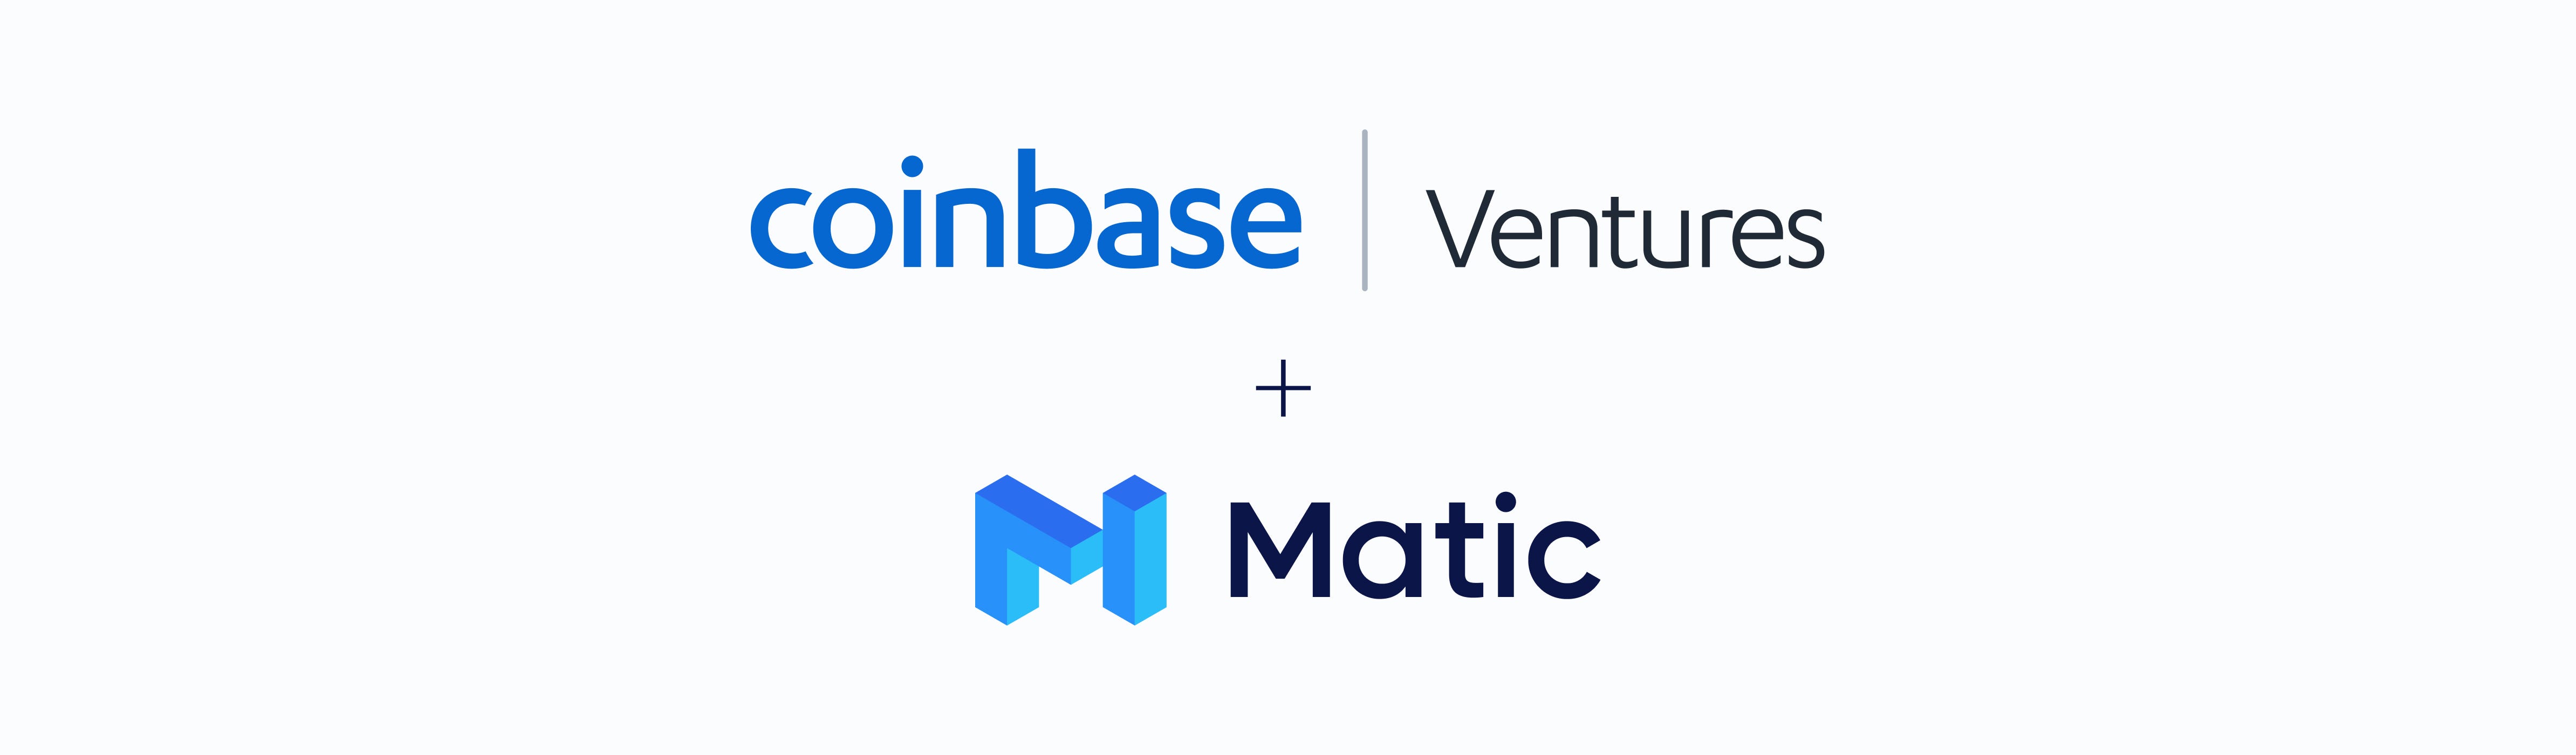 Announcing our funding round. Coinbase Ventures is backing ...